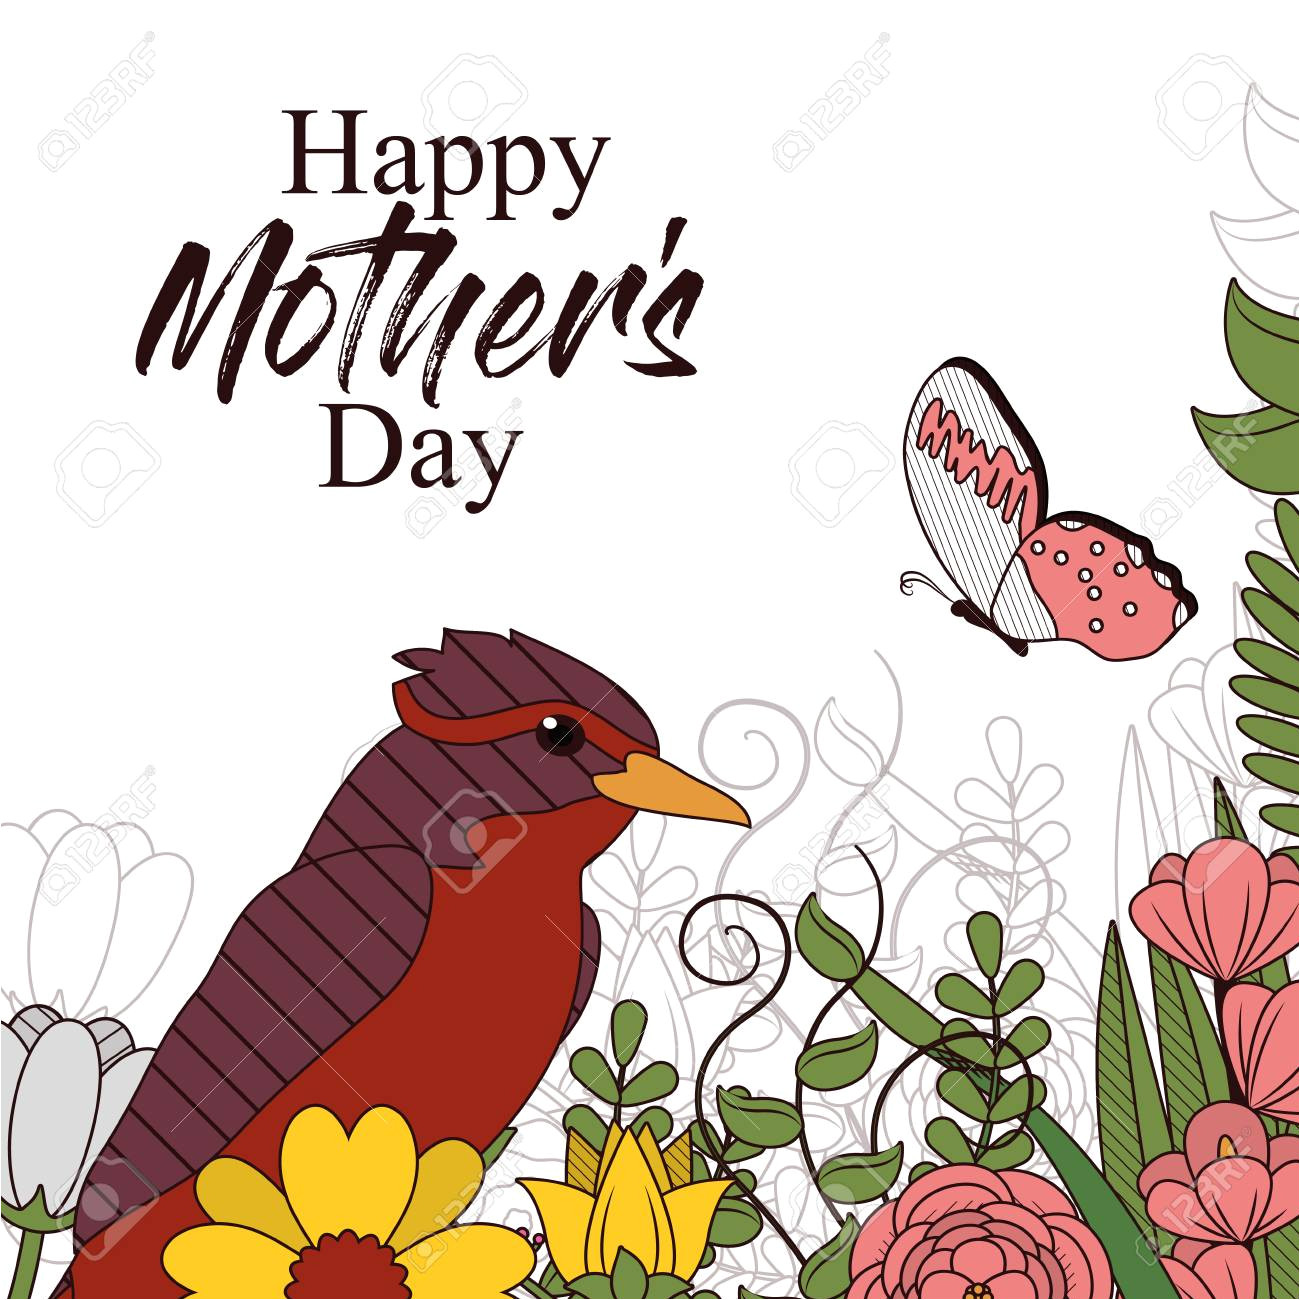 96901201 happy mothers day card with beautiful flowers colorful vector illustration graphic jpg